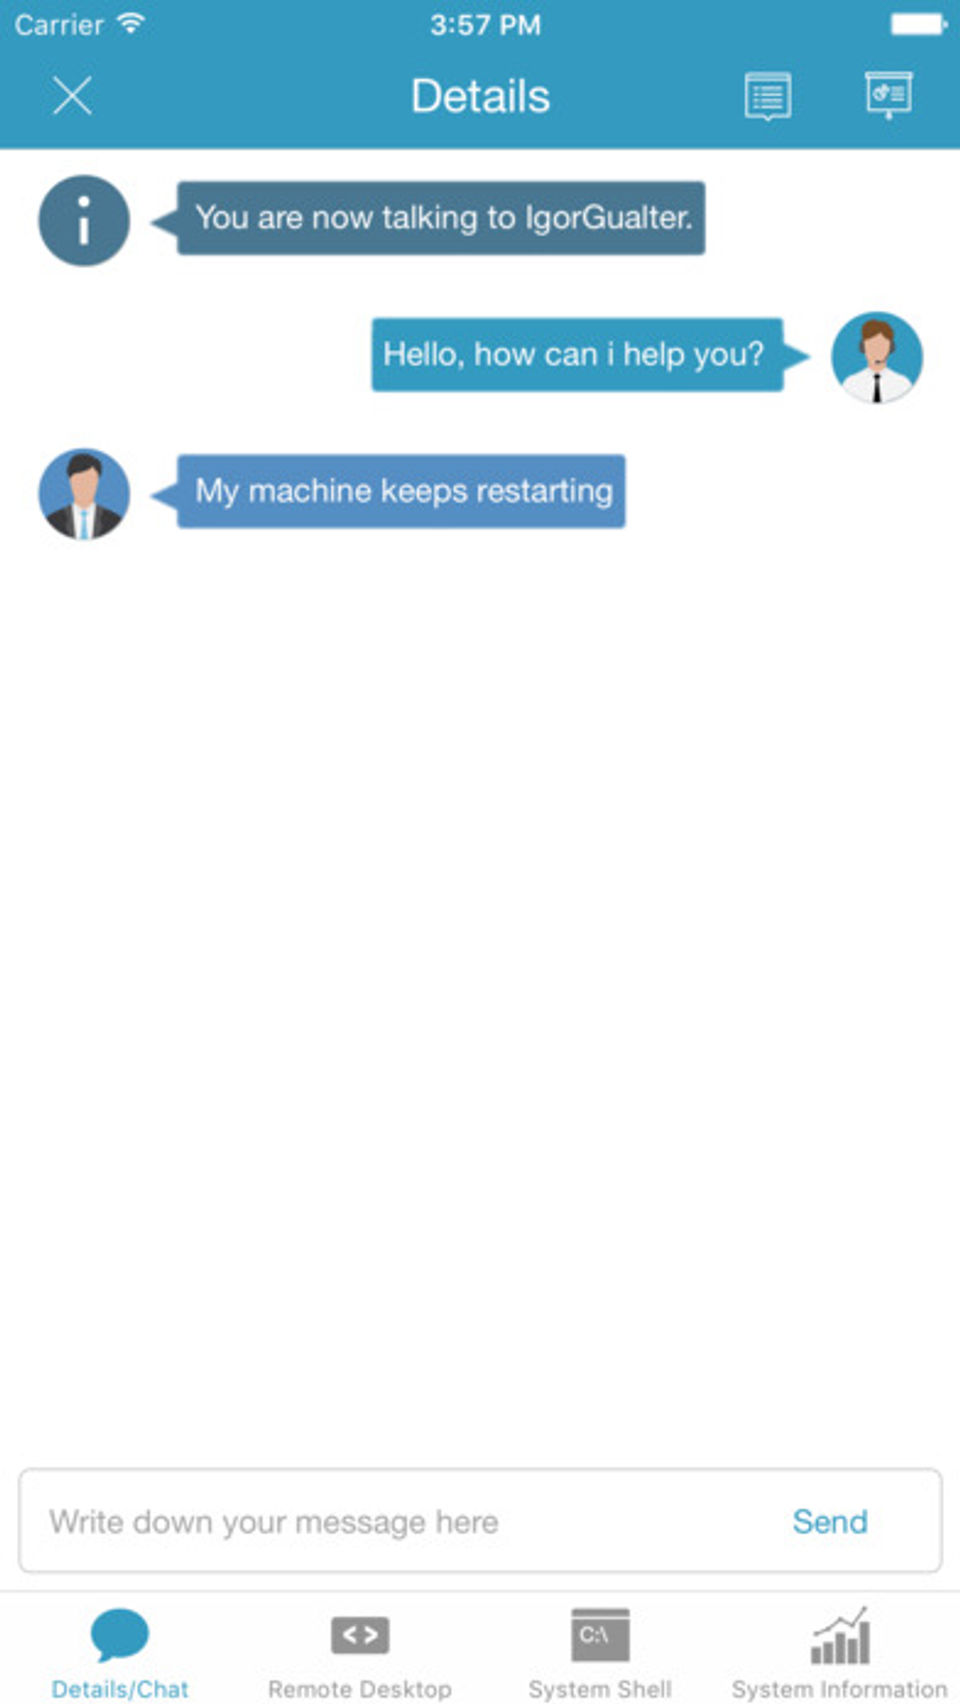 SolarWinds MSP Anywhere screenshot: Built-in live chat allows users to communicate with clients